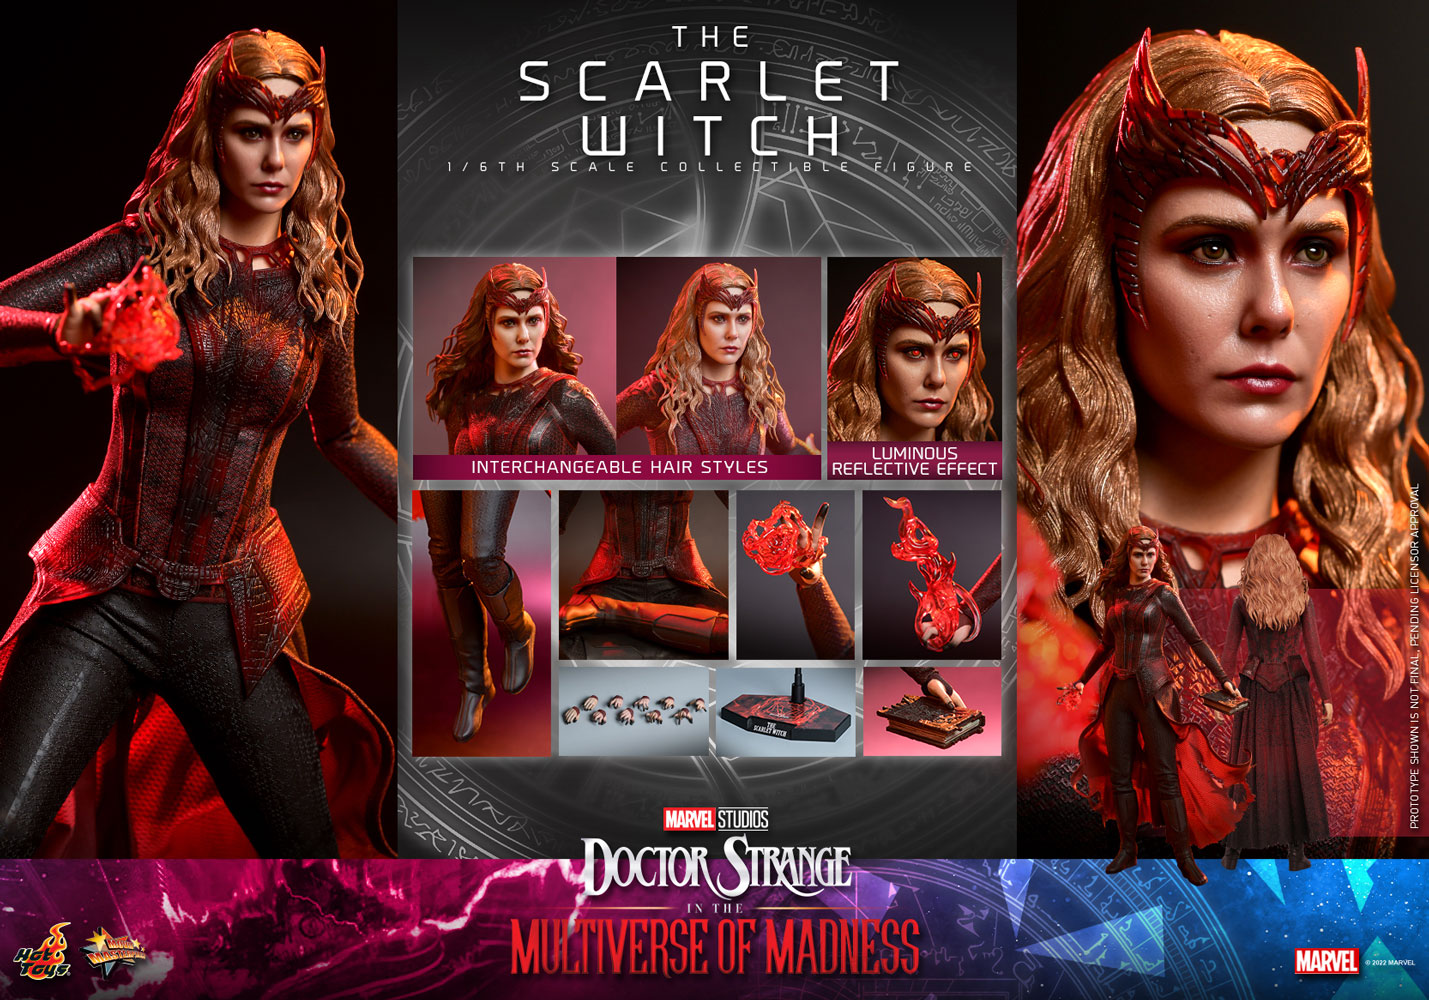 Scarlet Witch (Avengers Endgame) 1/6 Scale Figure by Hot Toys